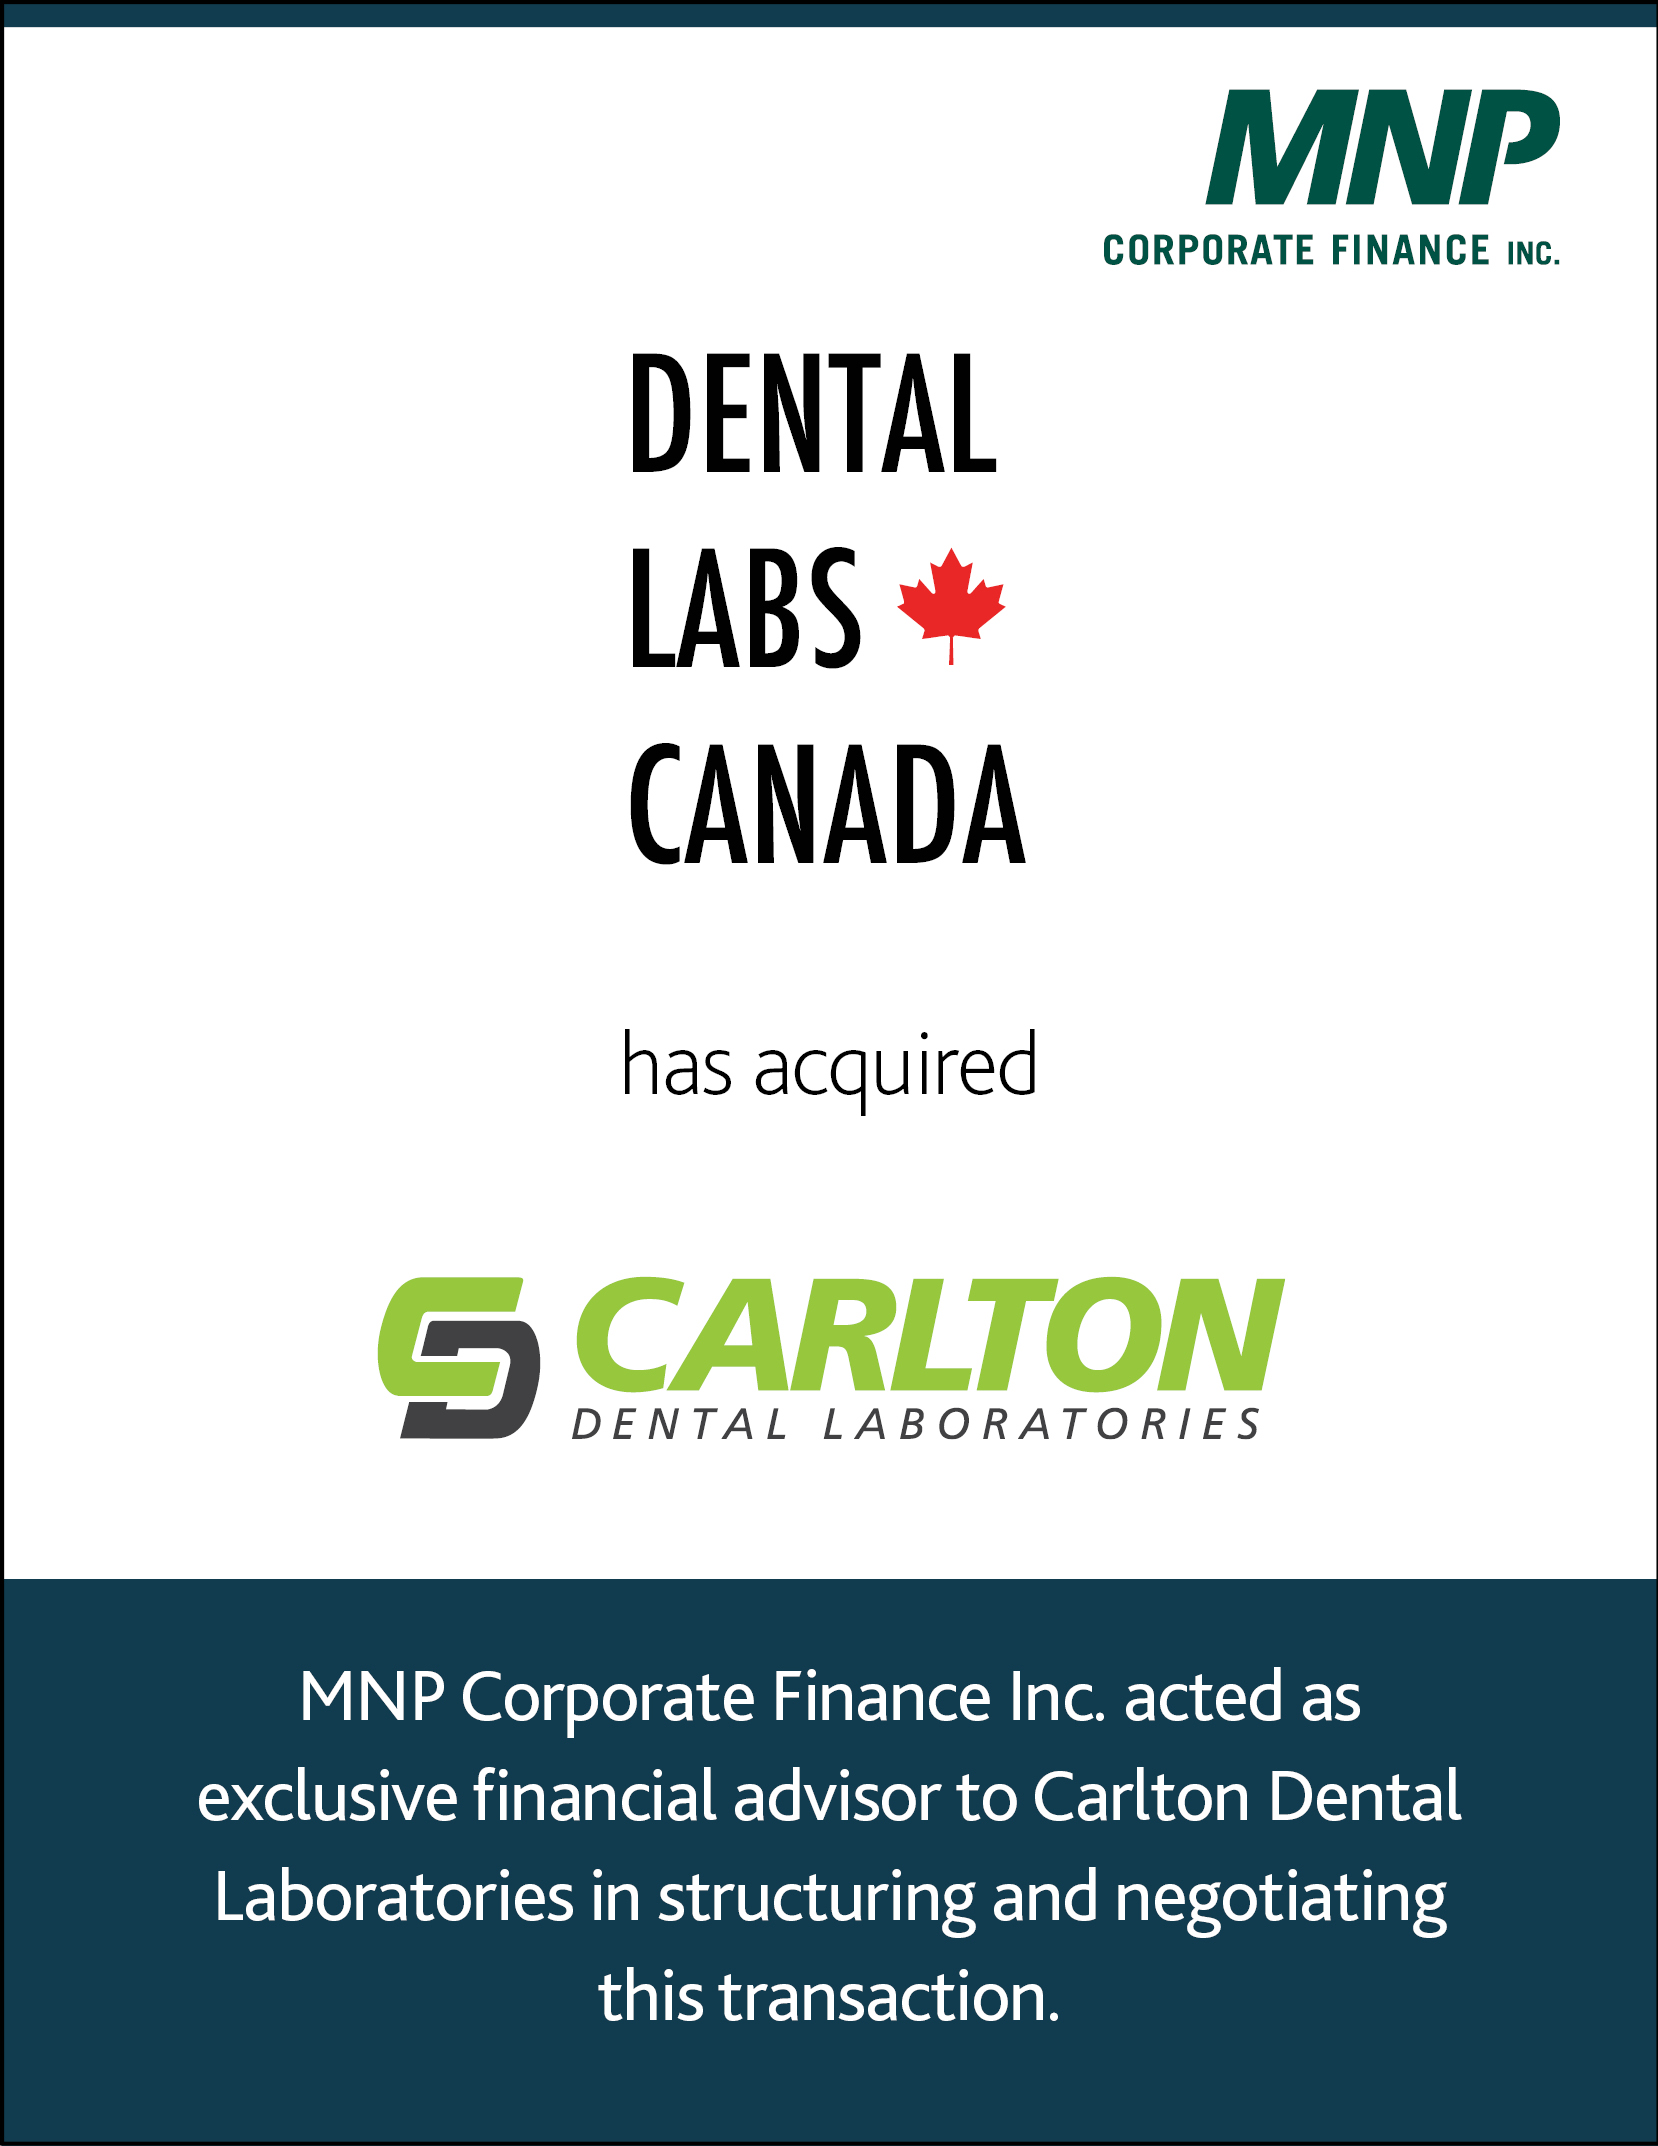 Dental Labs of Canada has acquired Carlton Dental Laboratories.